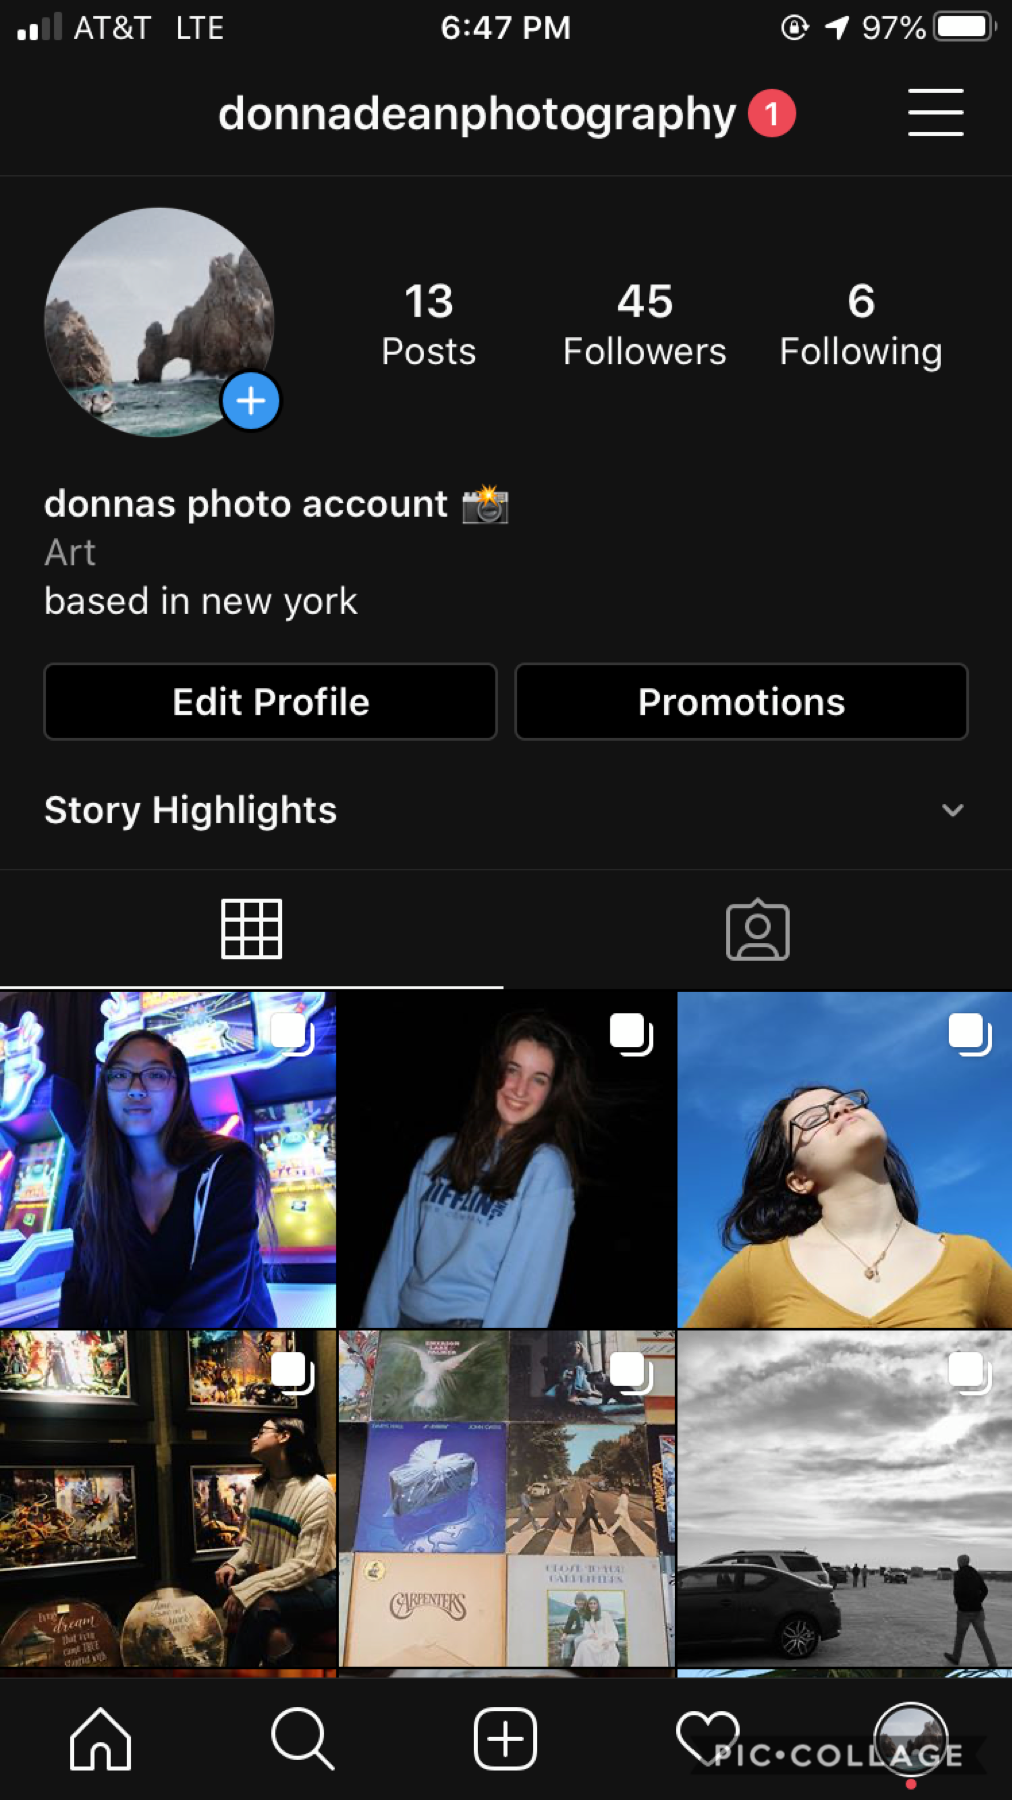 hello ! i’m sorry i’m not active on here anymore but i would really appreciate if you guys go follow my photography account on instagram @donnadeanphotography i’m trying to be successful with my photography since it is a passion of mine thank you for your